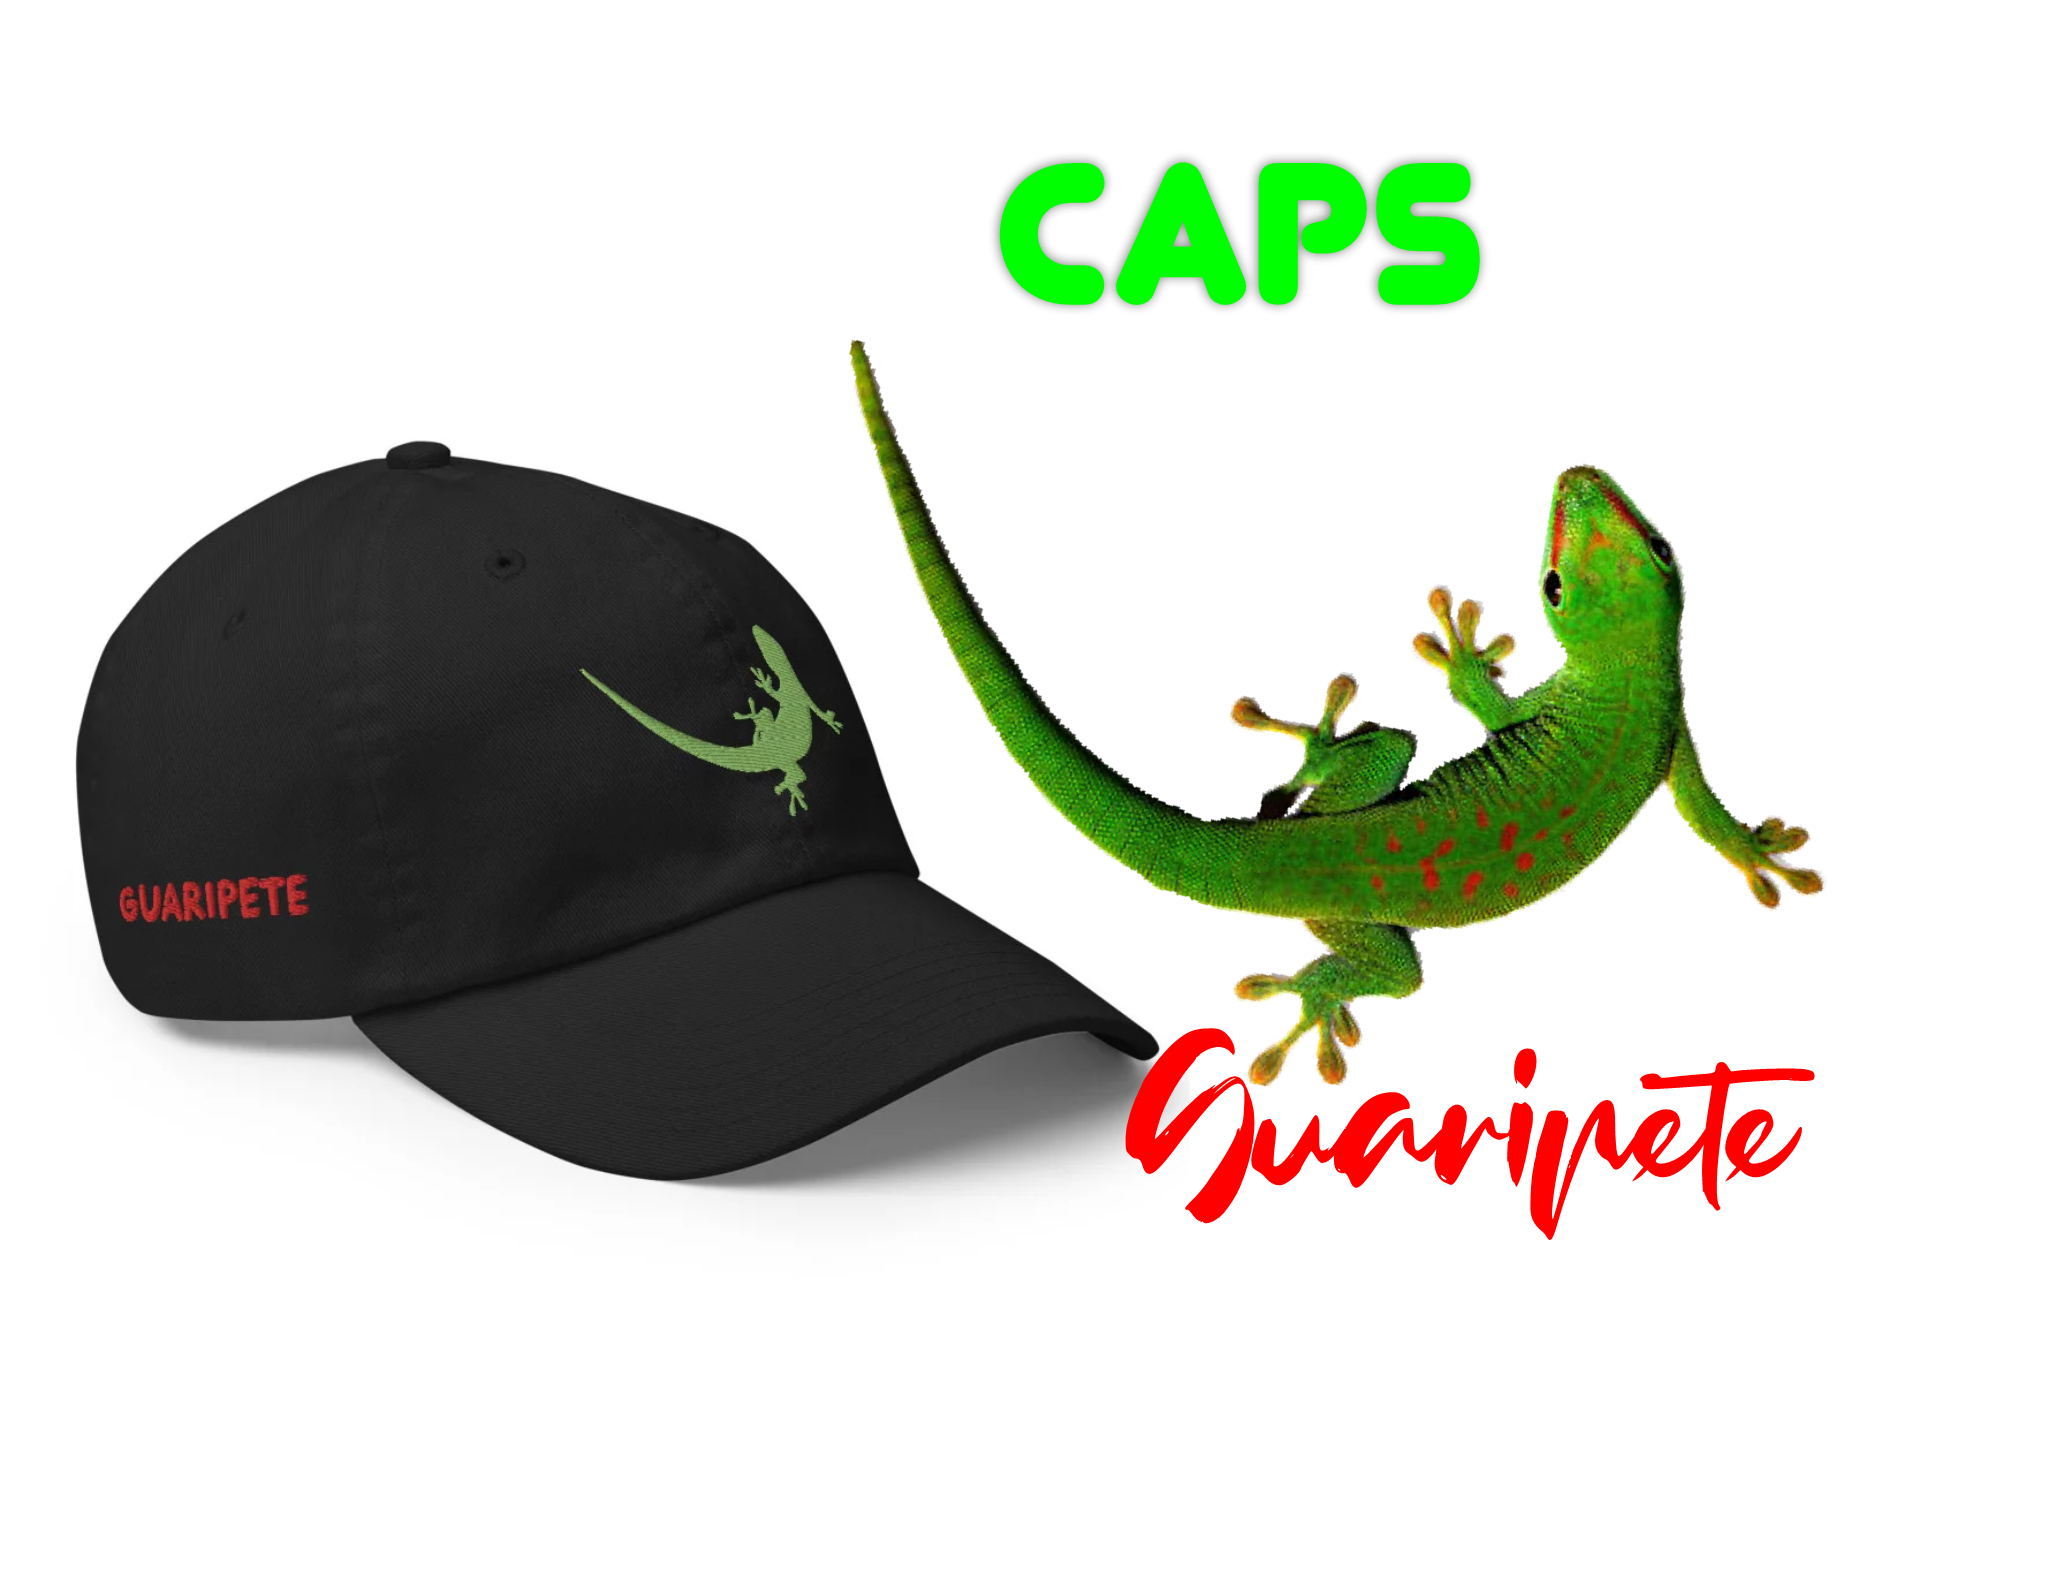 Caps by Guaripete